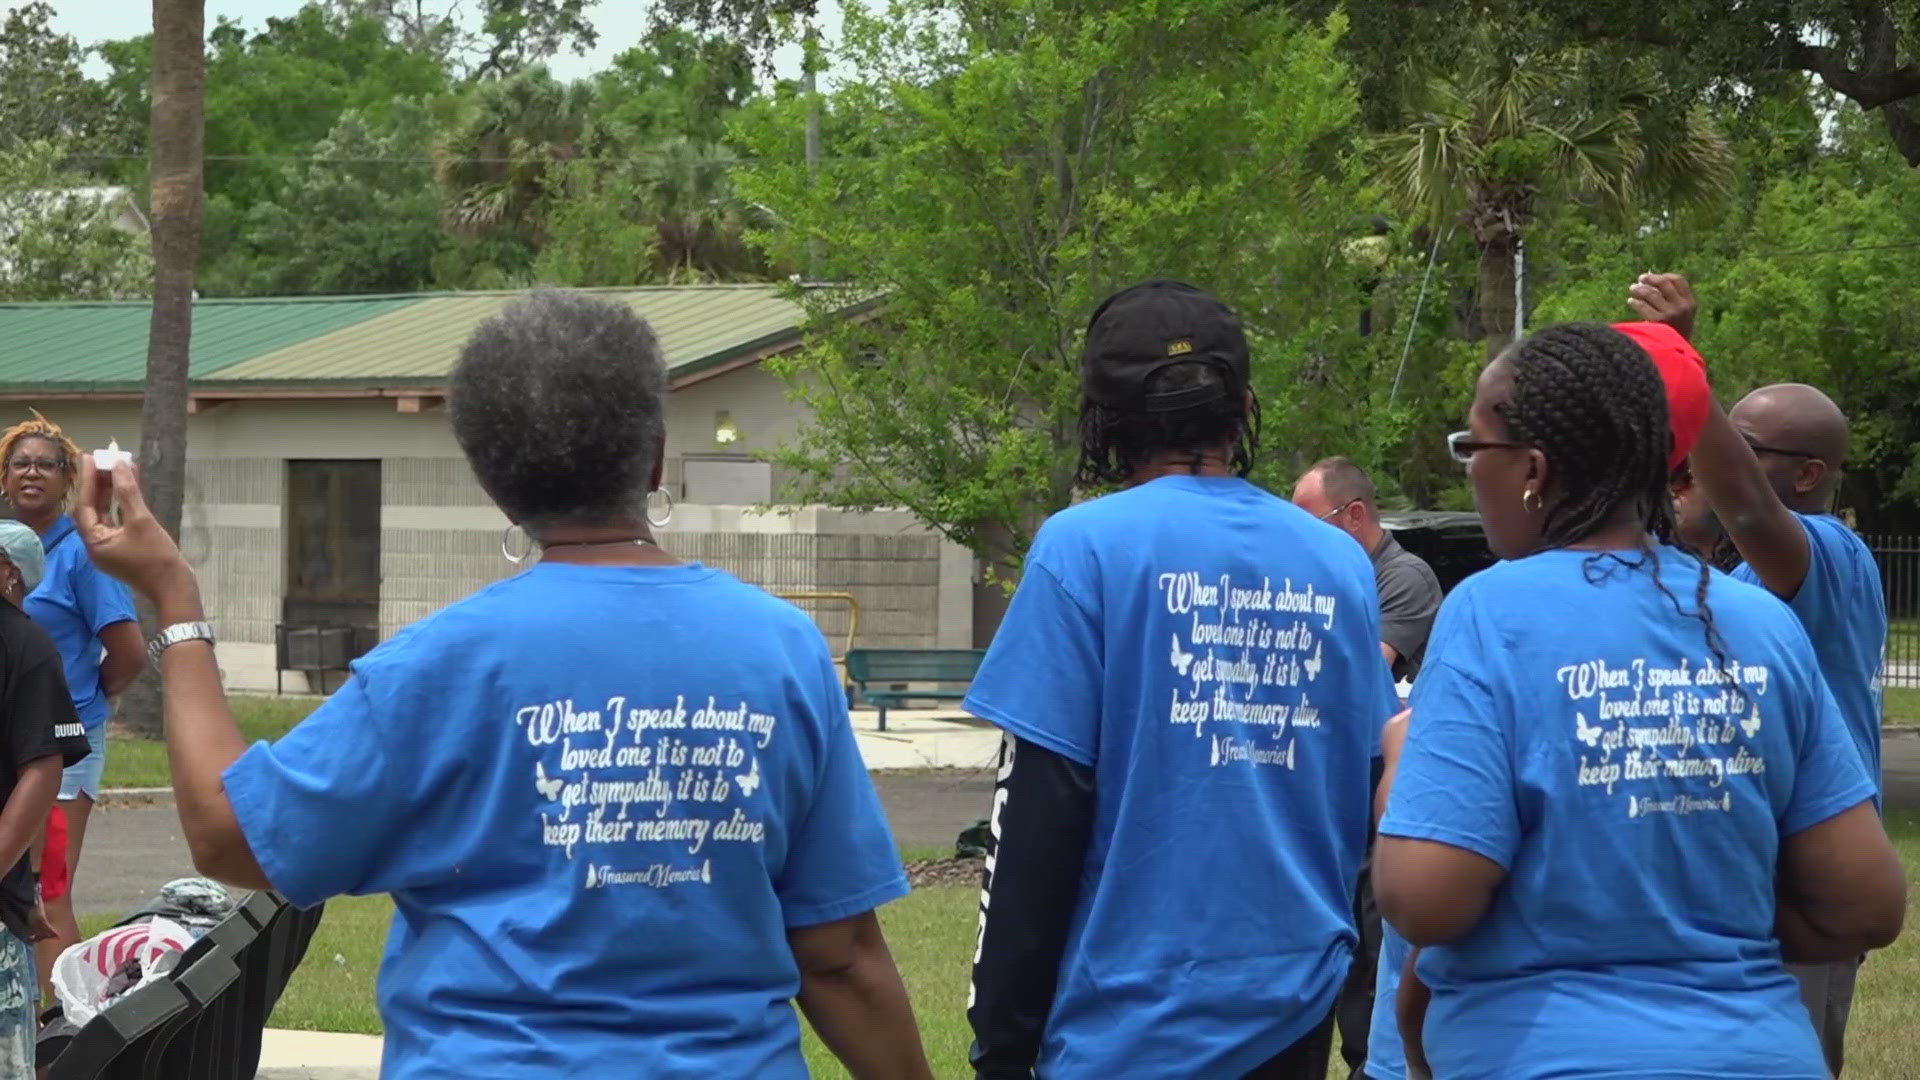 From police officers to grieving mothers and fathers. Community members stood at A. Philip Randolph Heritage Park for a nationwide healing day.